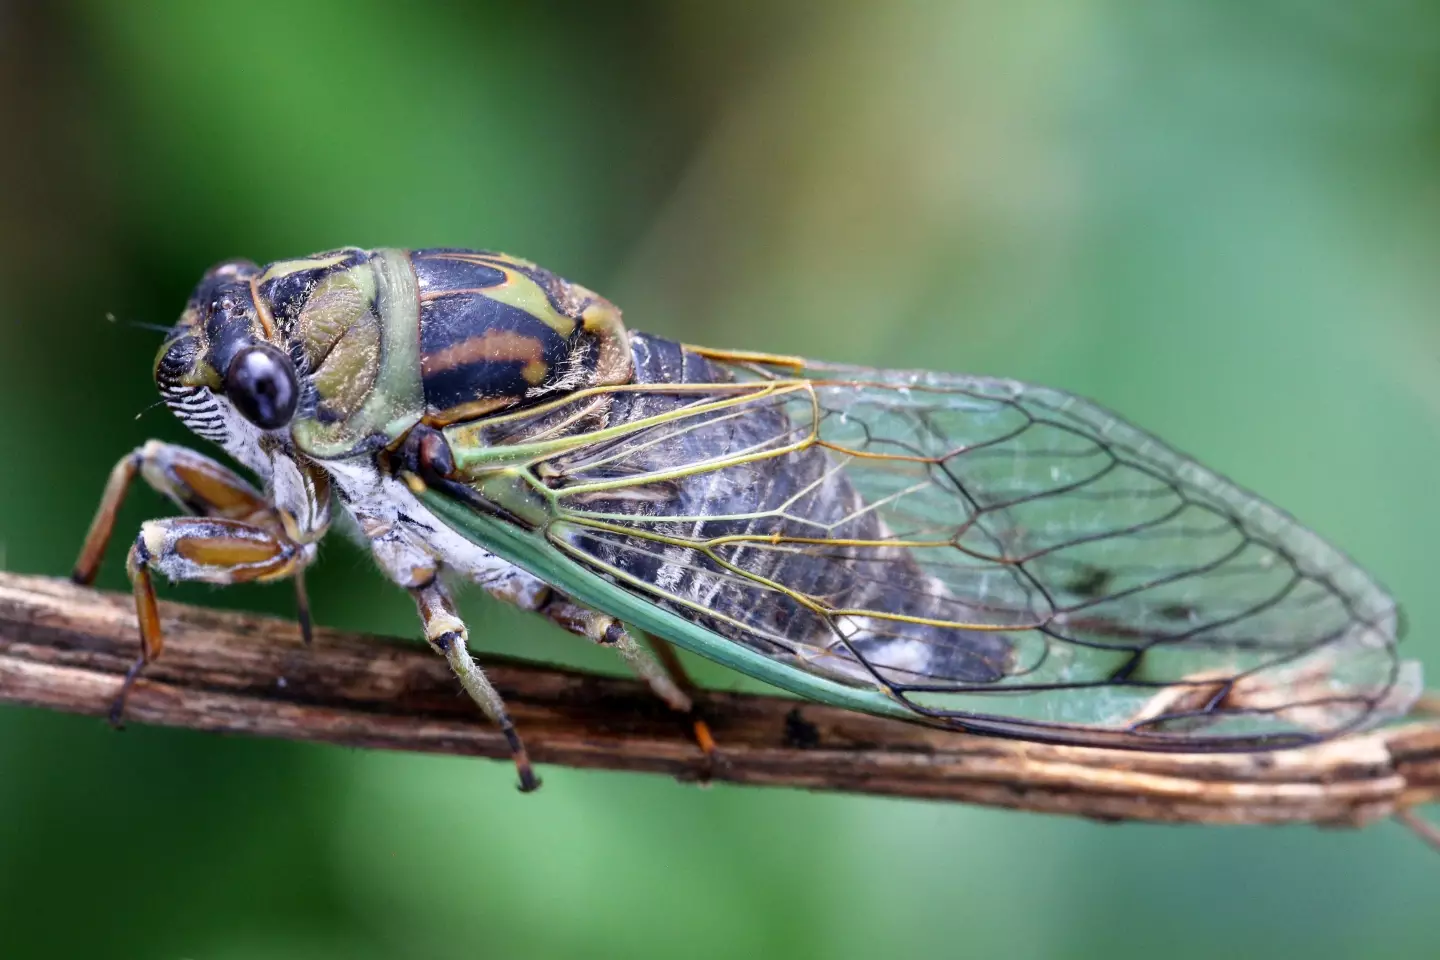 The cicadas will be out in force this year.